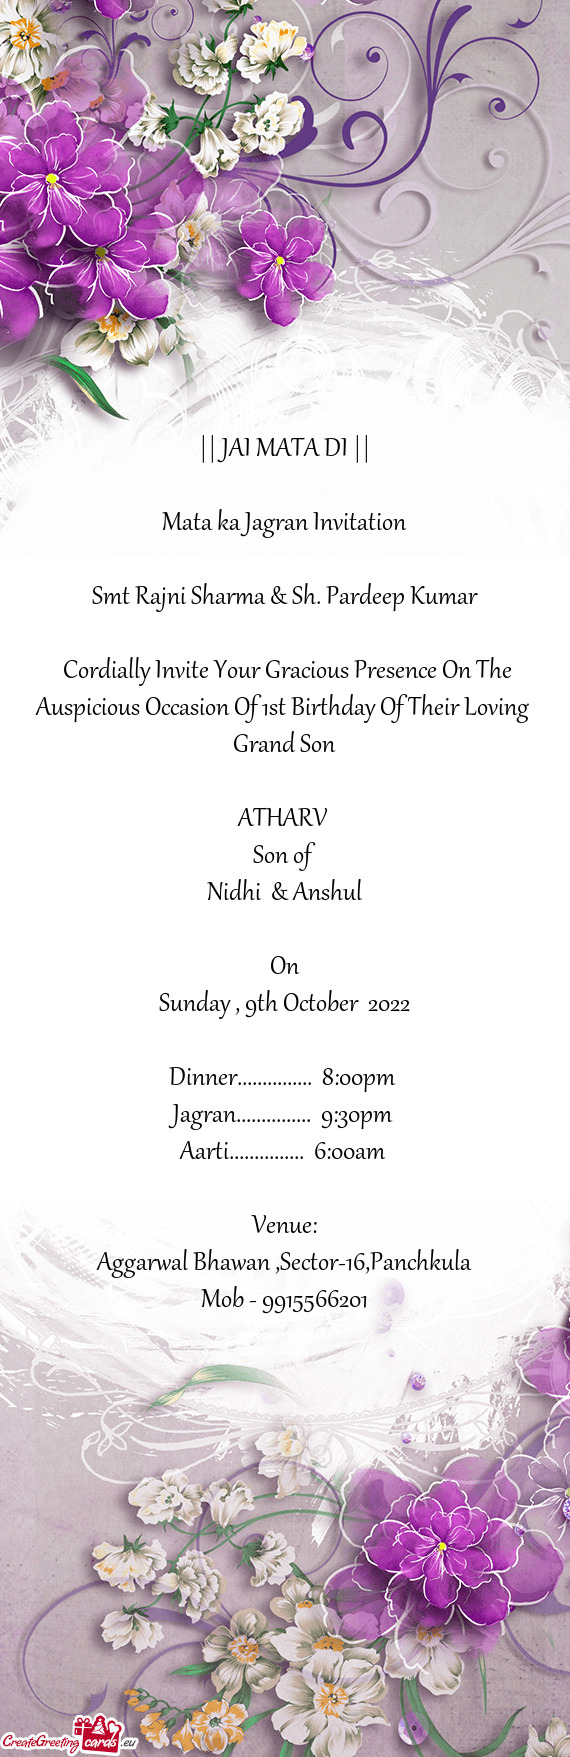 Cordially Invite Your Gracious Presence On The Auspicious Occasion Of 1st Birthday Of Their Loving